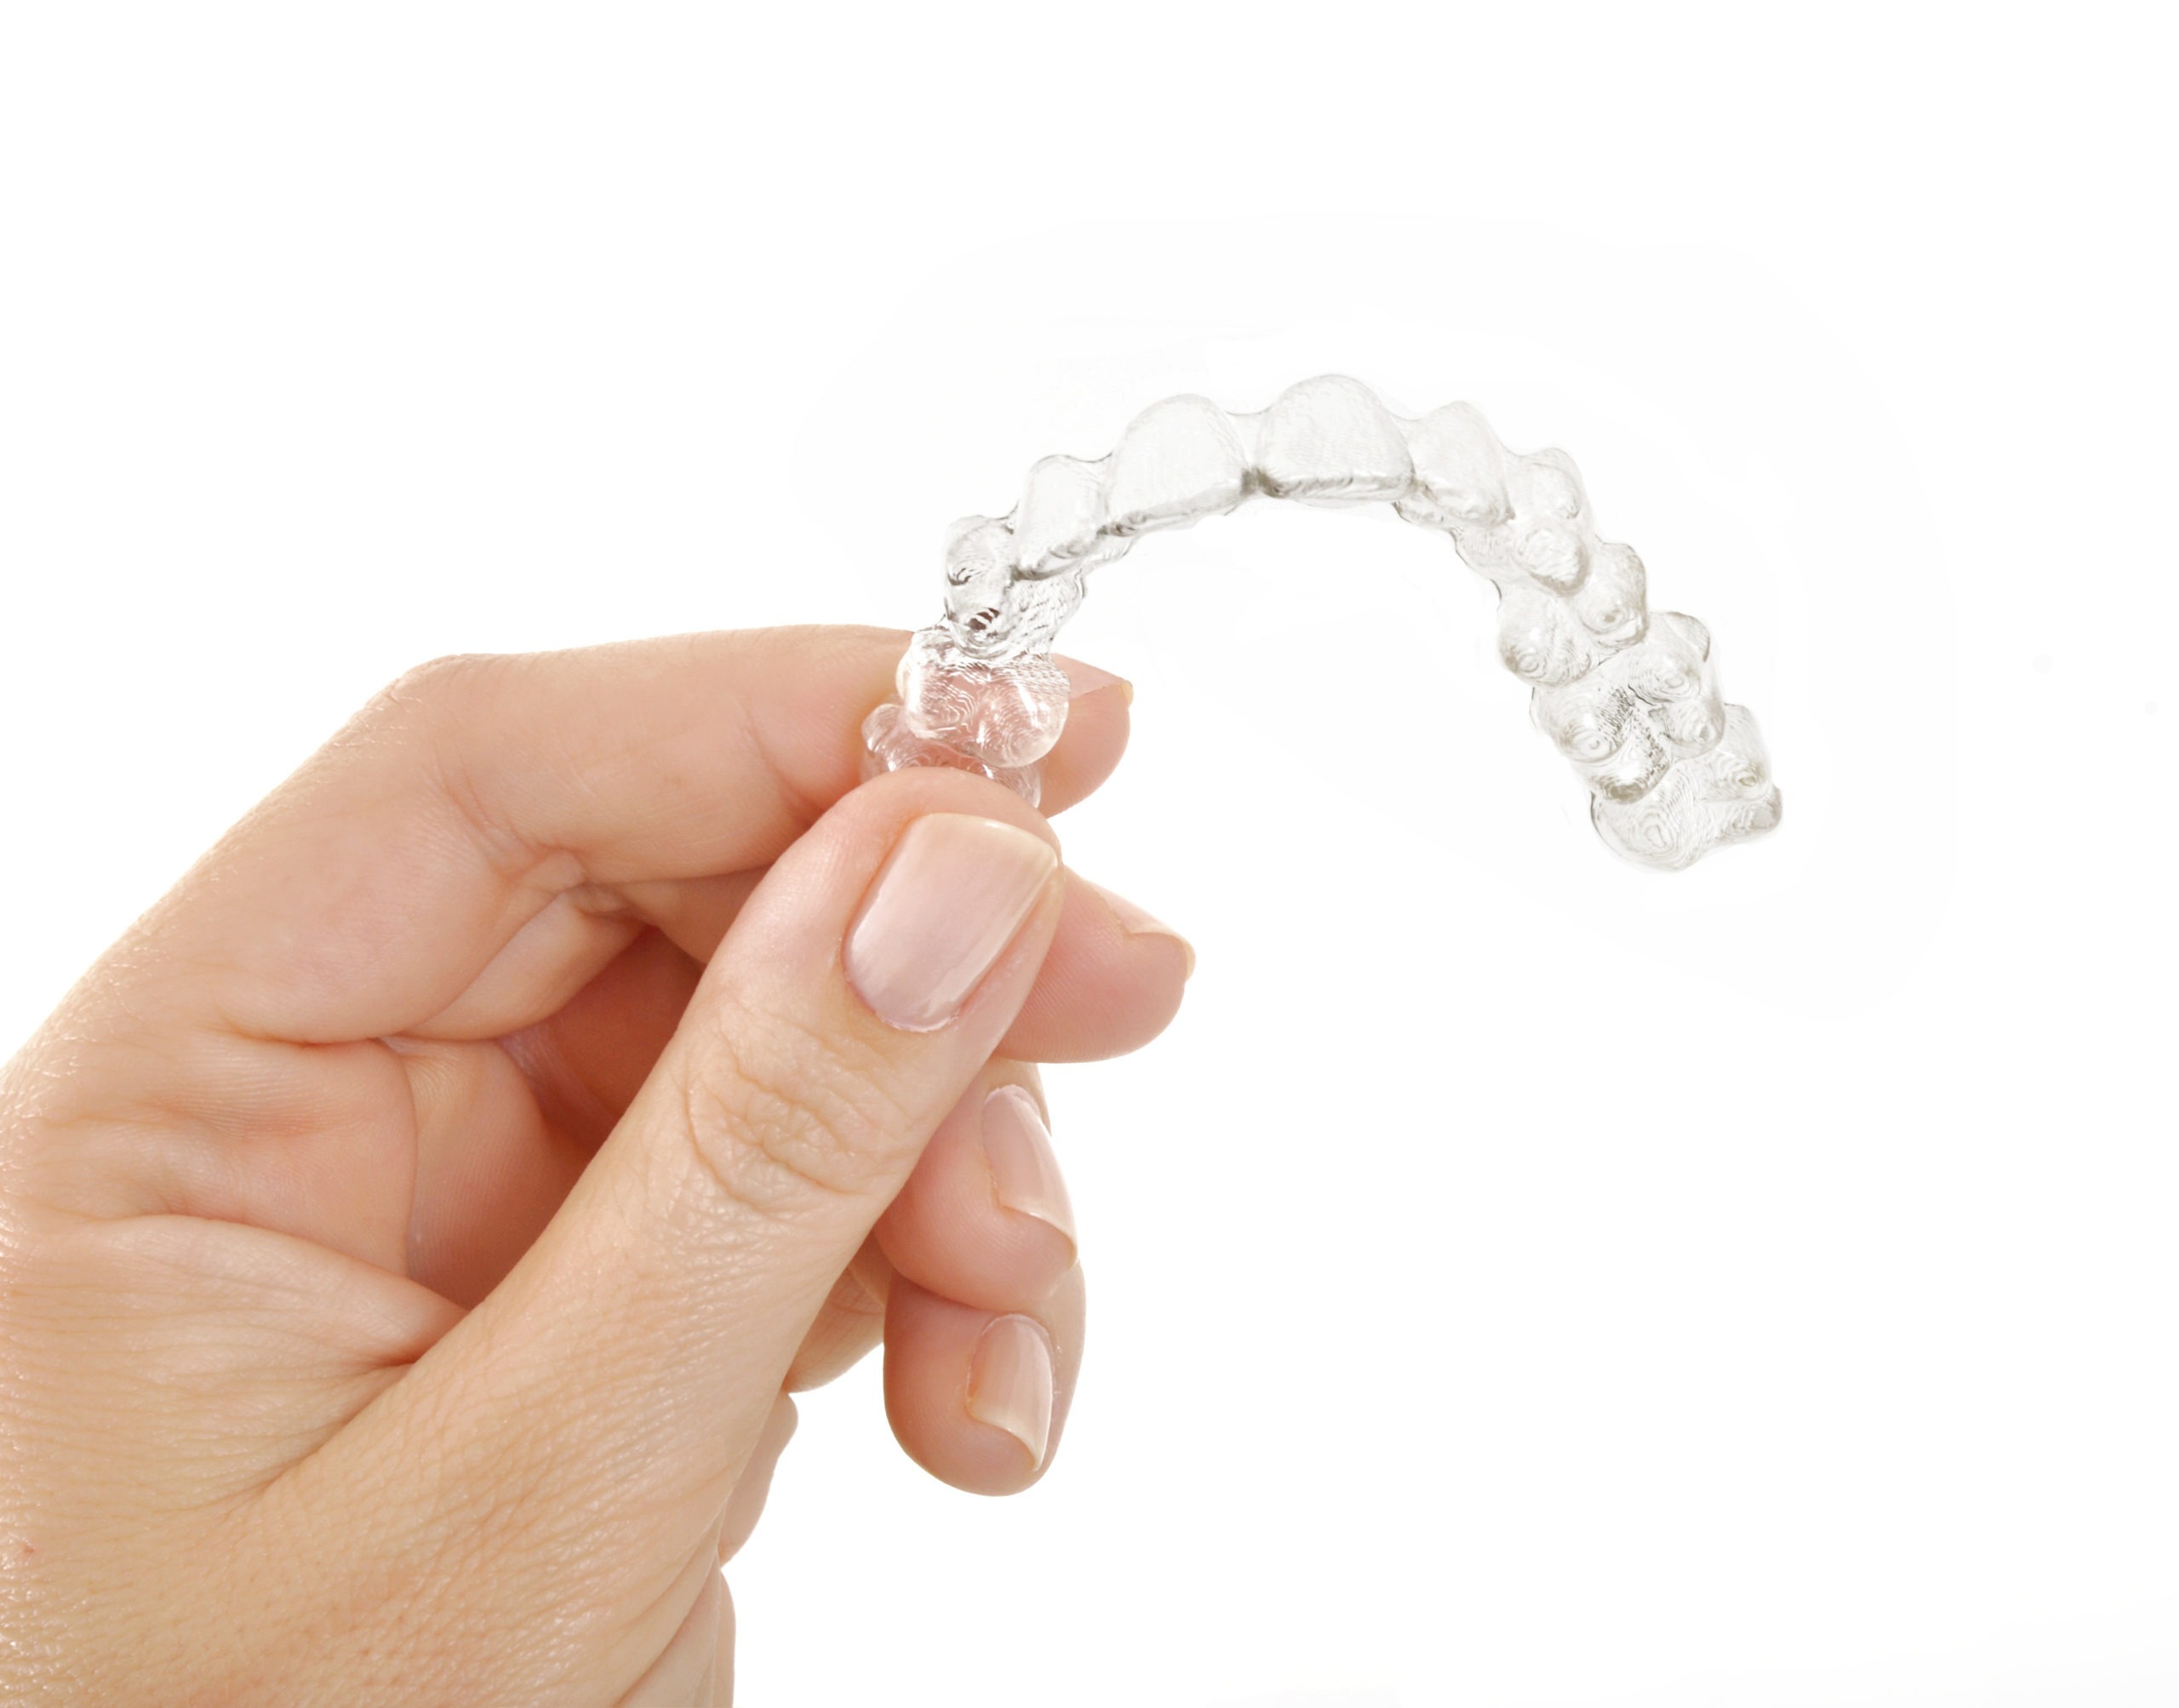 The Truth About Invisalign Clear Aligners